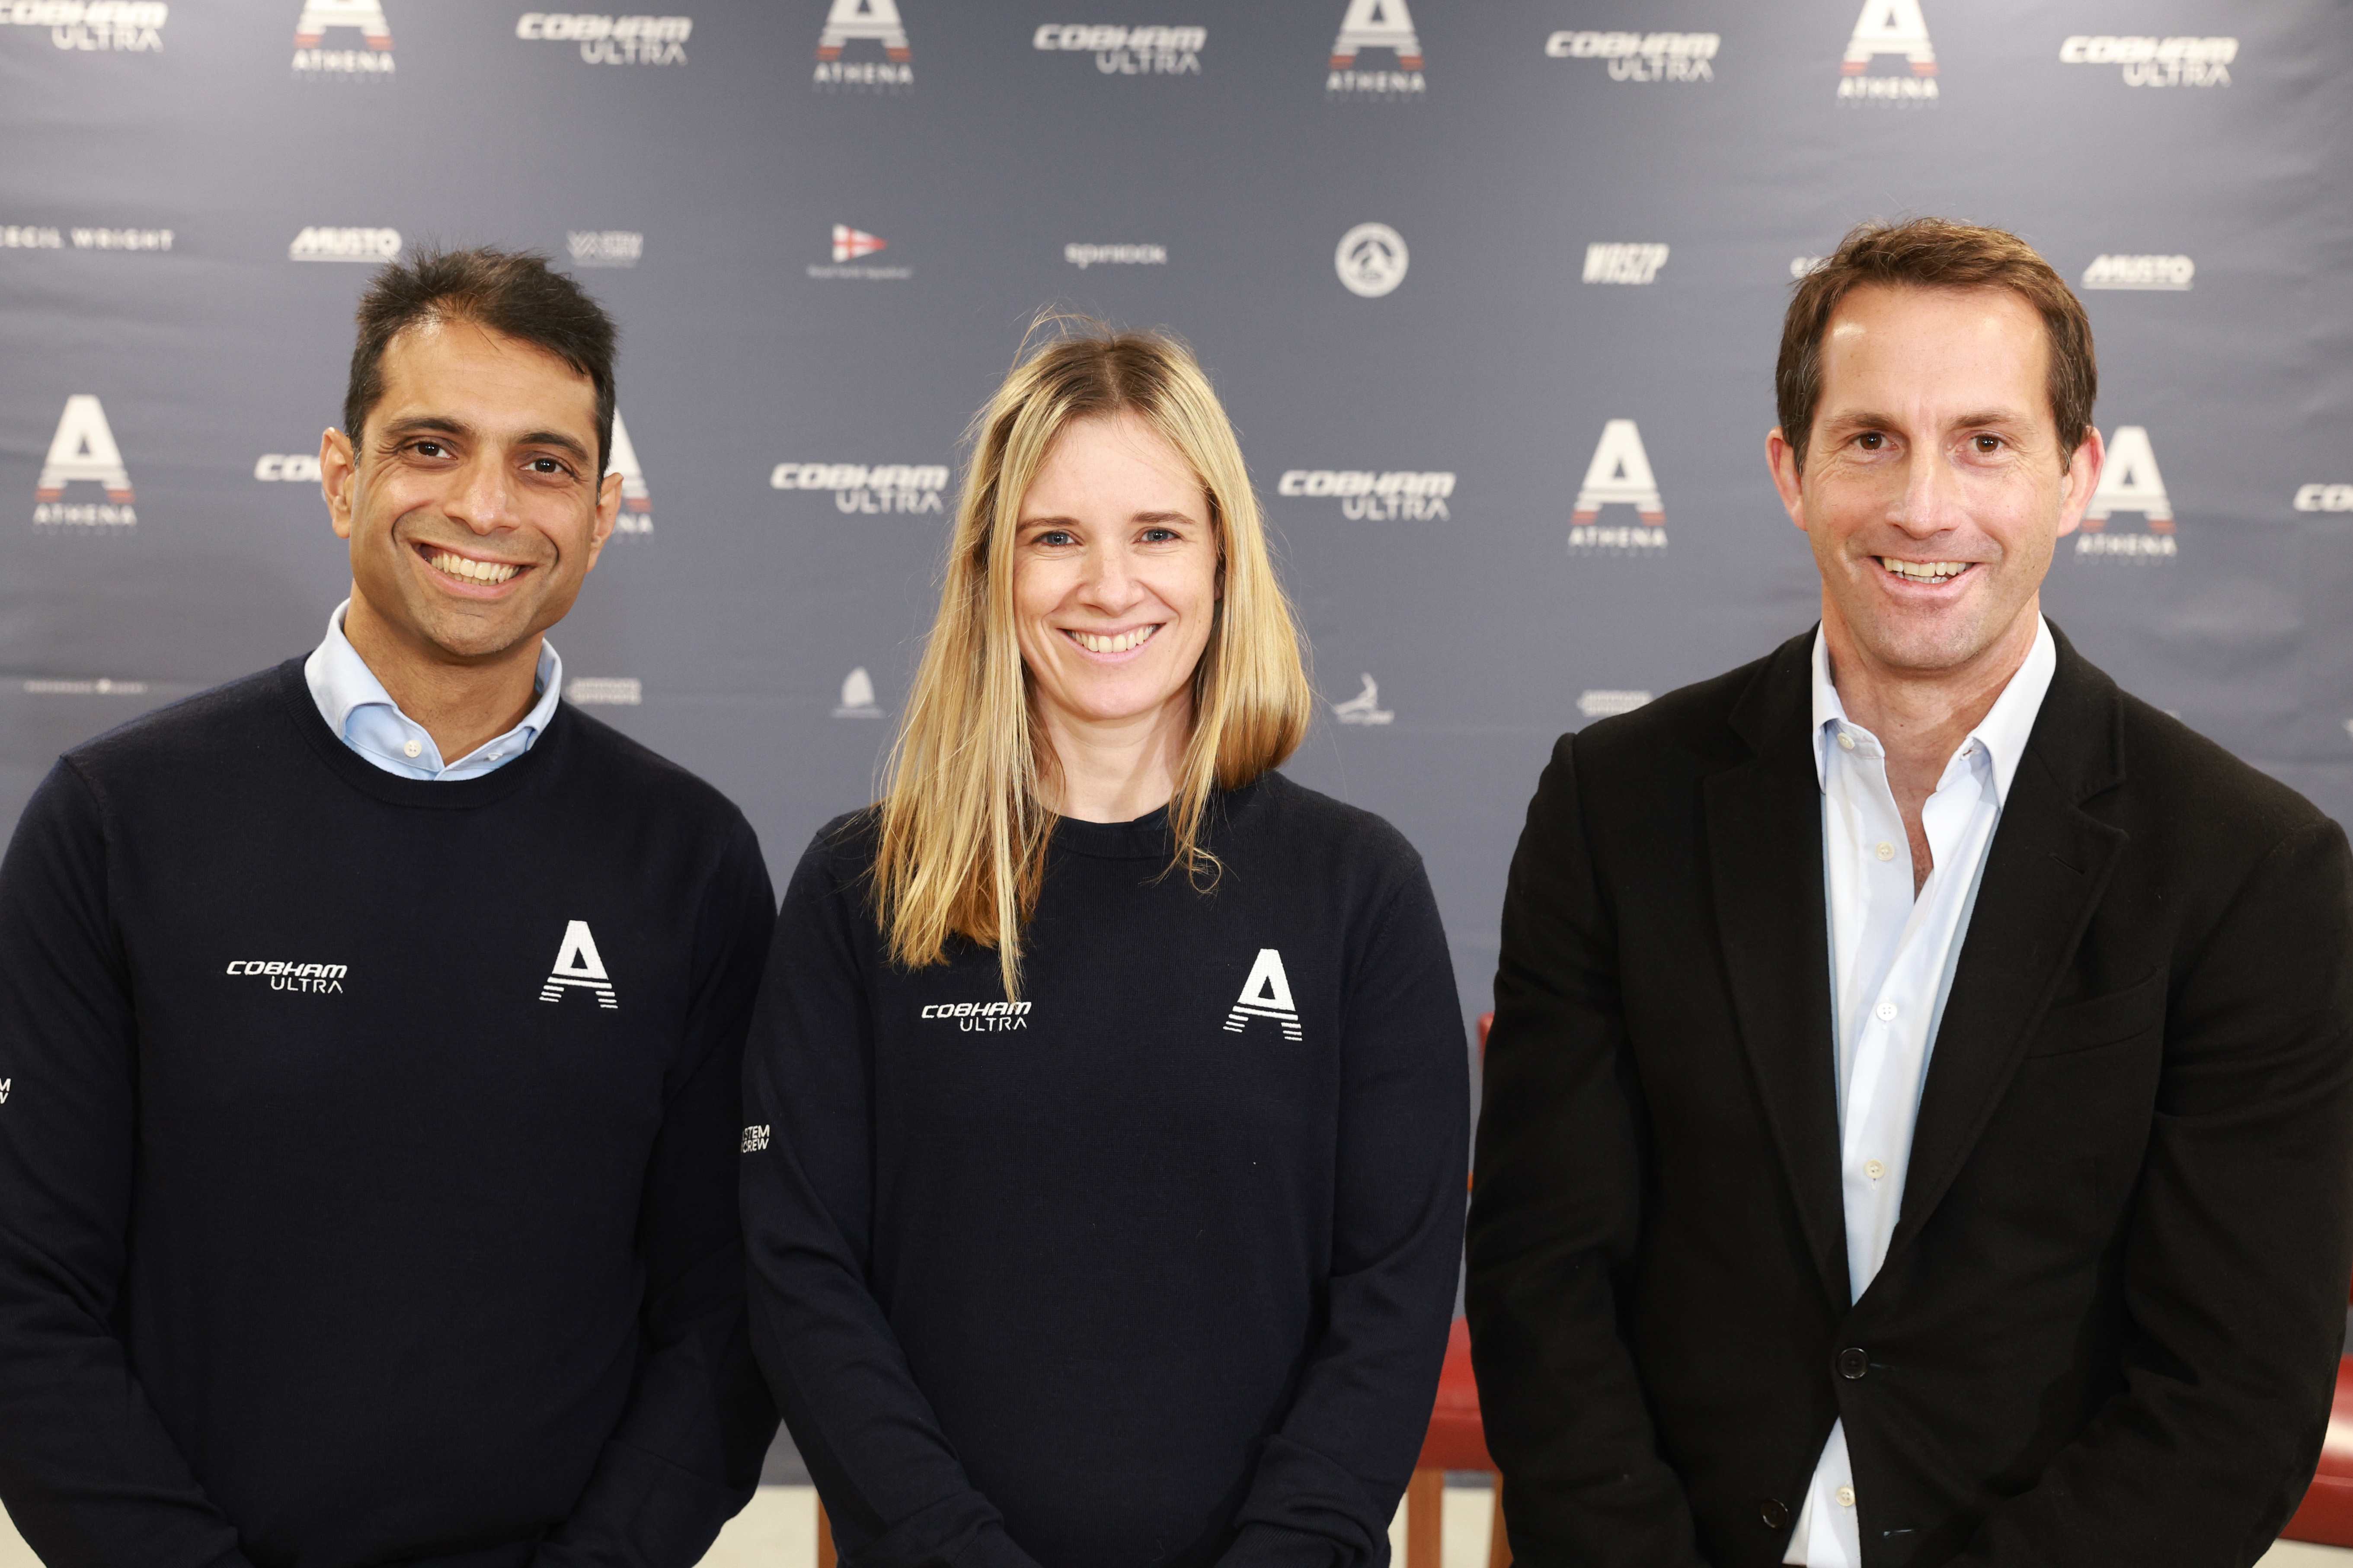 British team for the Women’s and Youth America’s Cup announce sailing squad and major new sponsorship from Cobham-Ultra